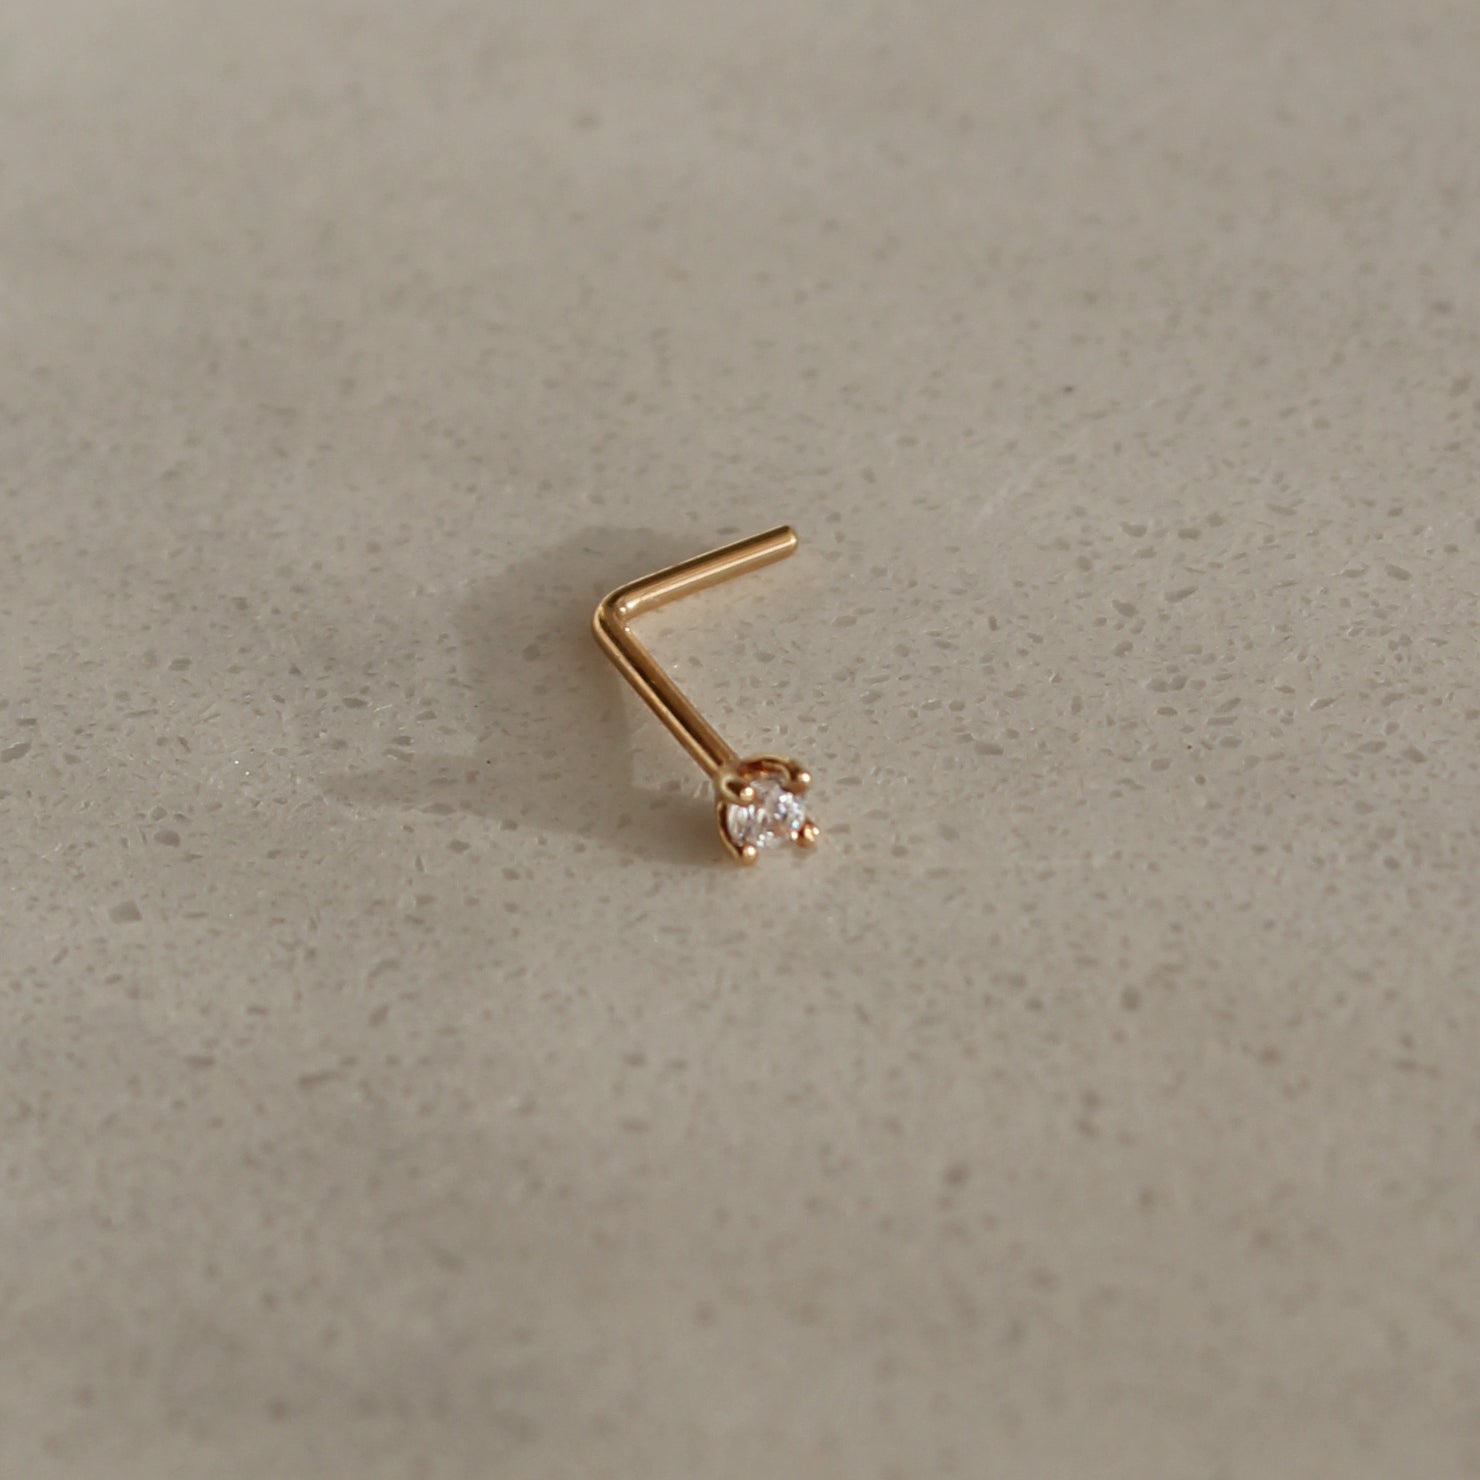 CHLUXE Solitaire Crystal Nose Stud - 14K Yellow Gold